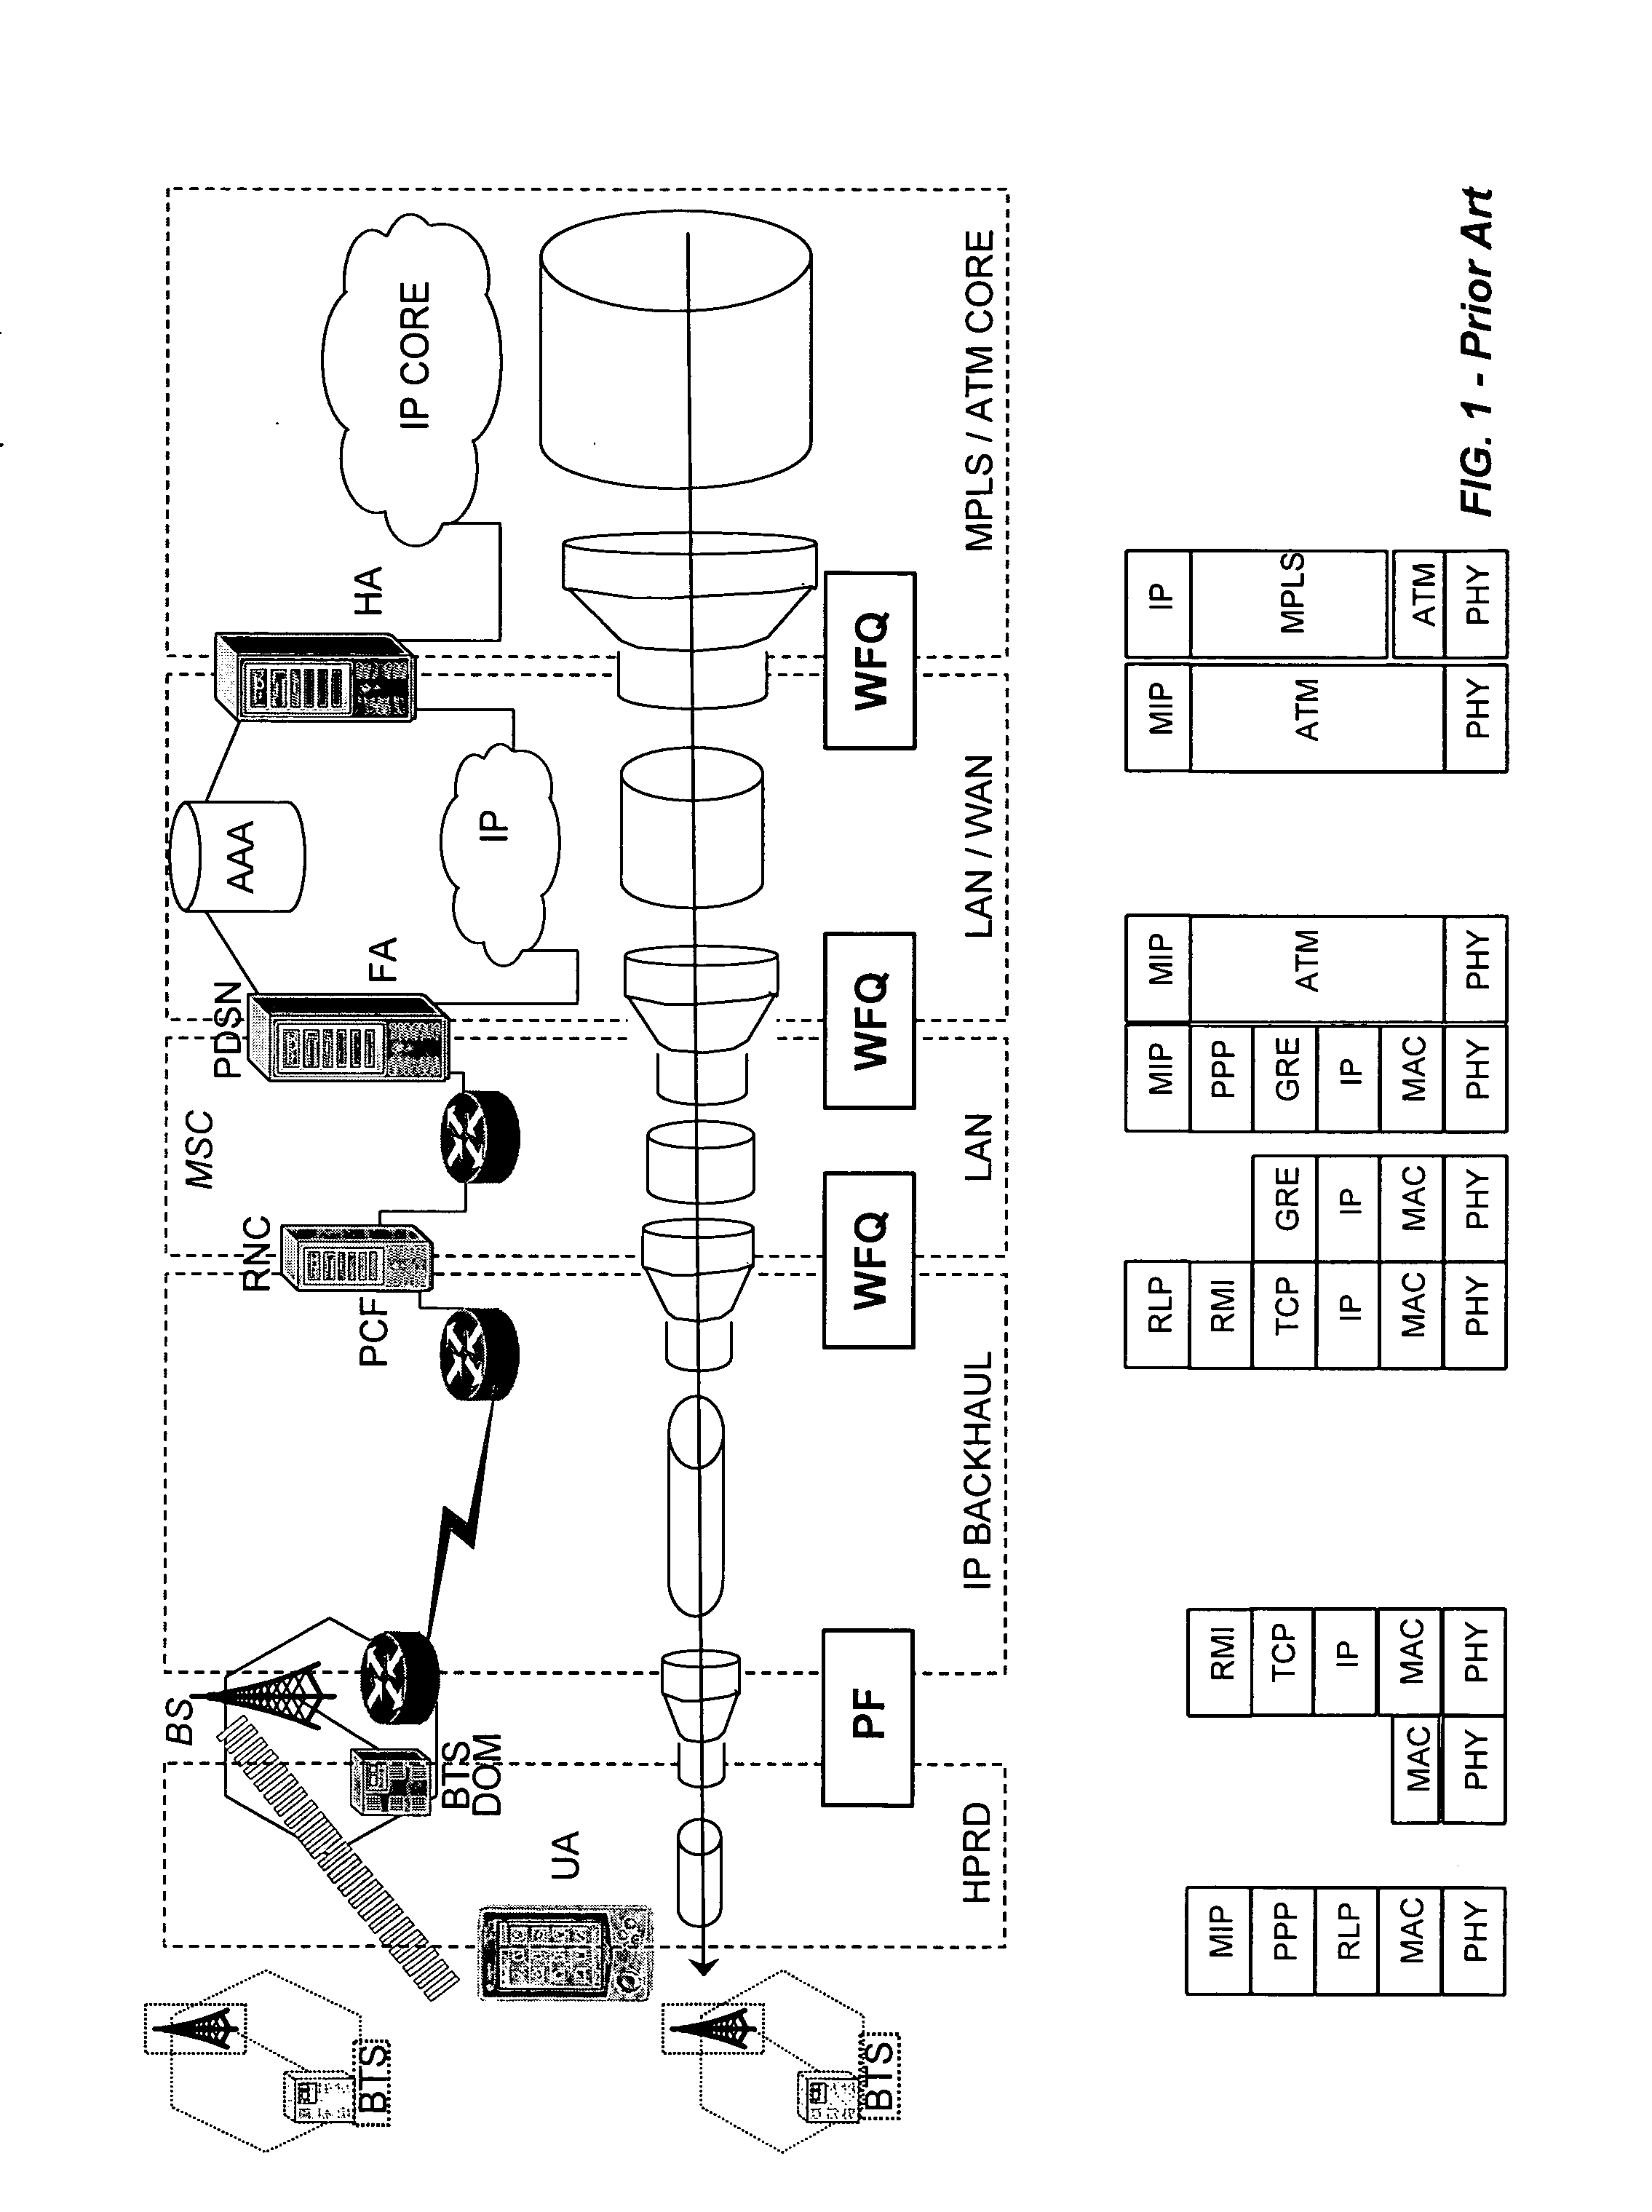 Integrated packet latency aware QoS scheduling using proportional fairness and weighted fair queuing for wireless integrated multimedia packet services